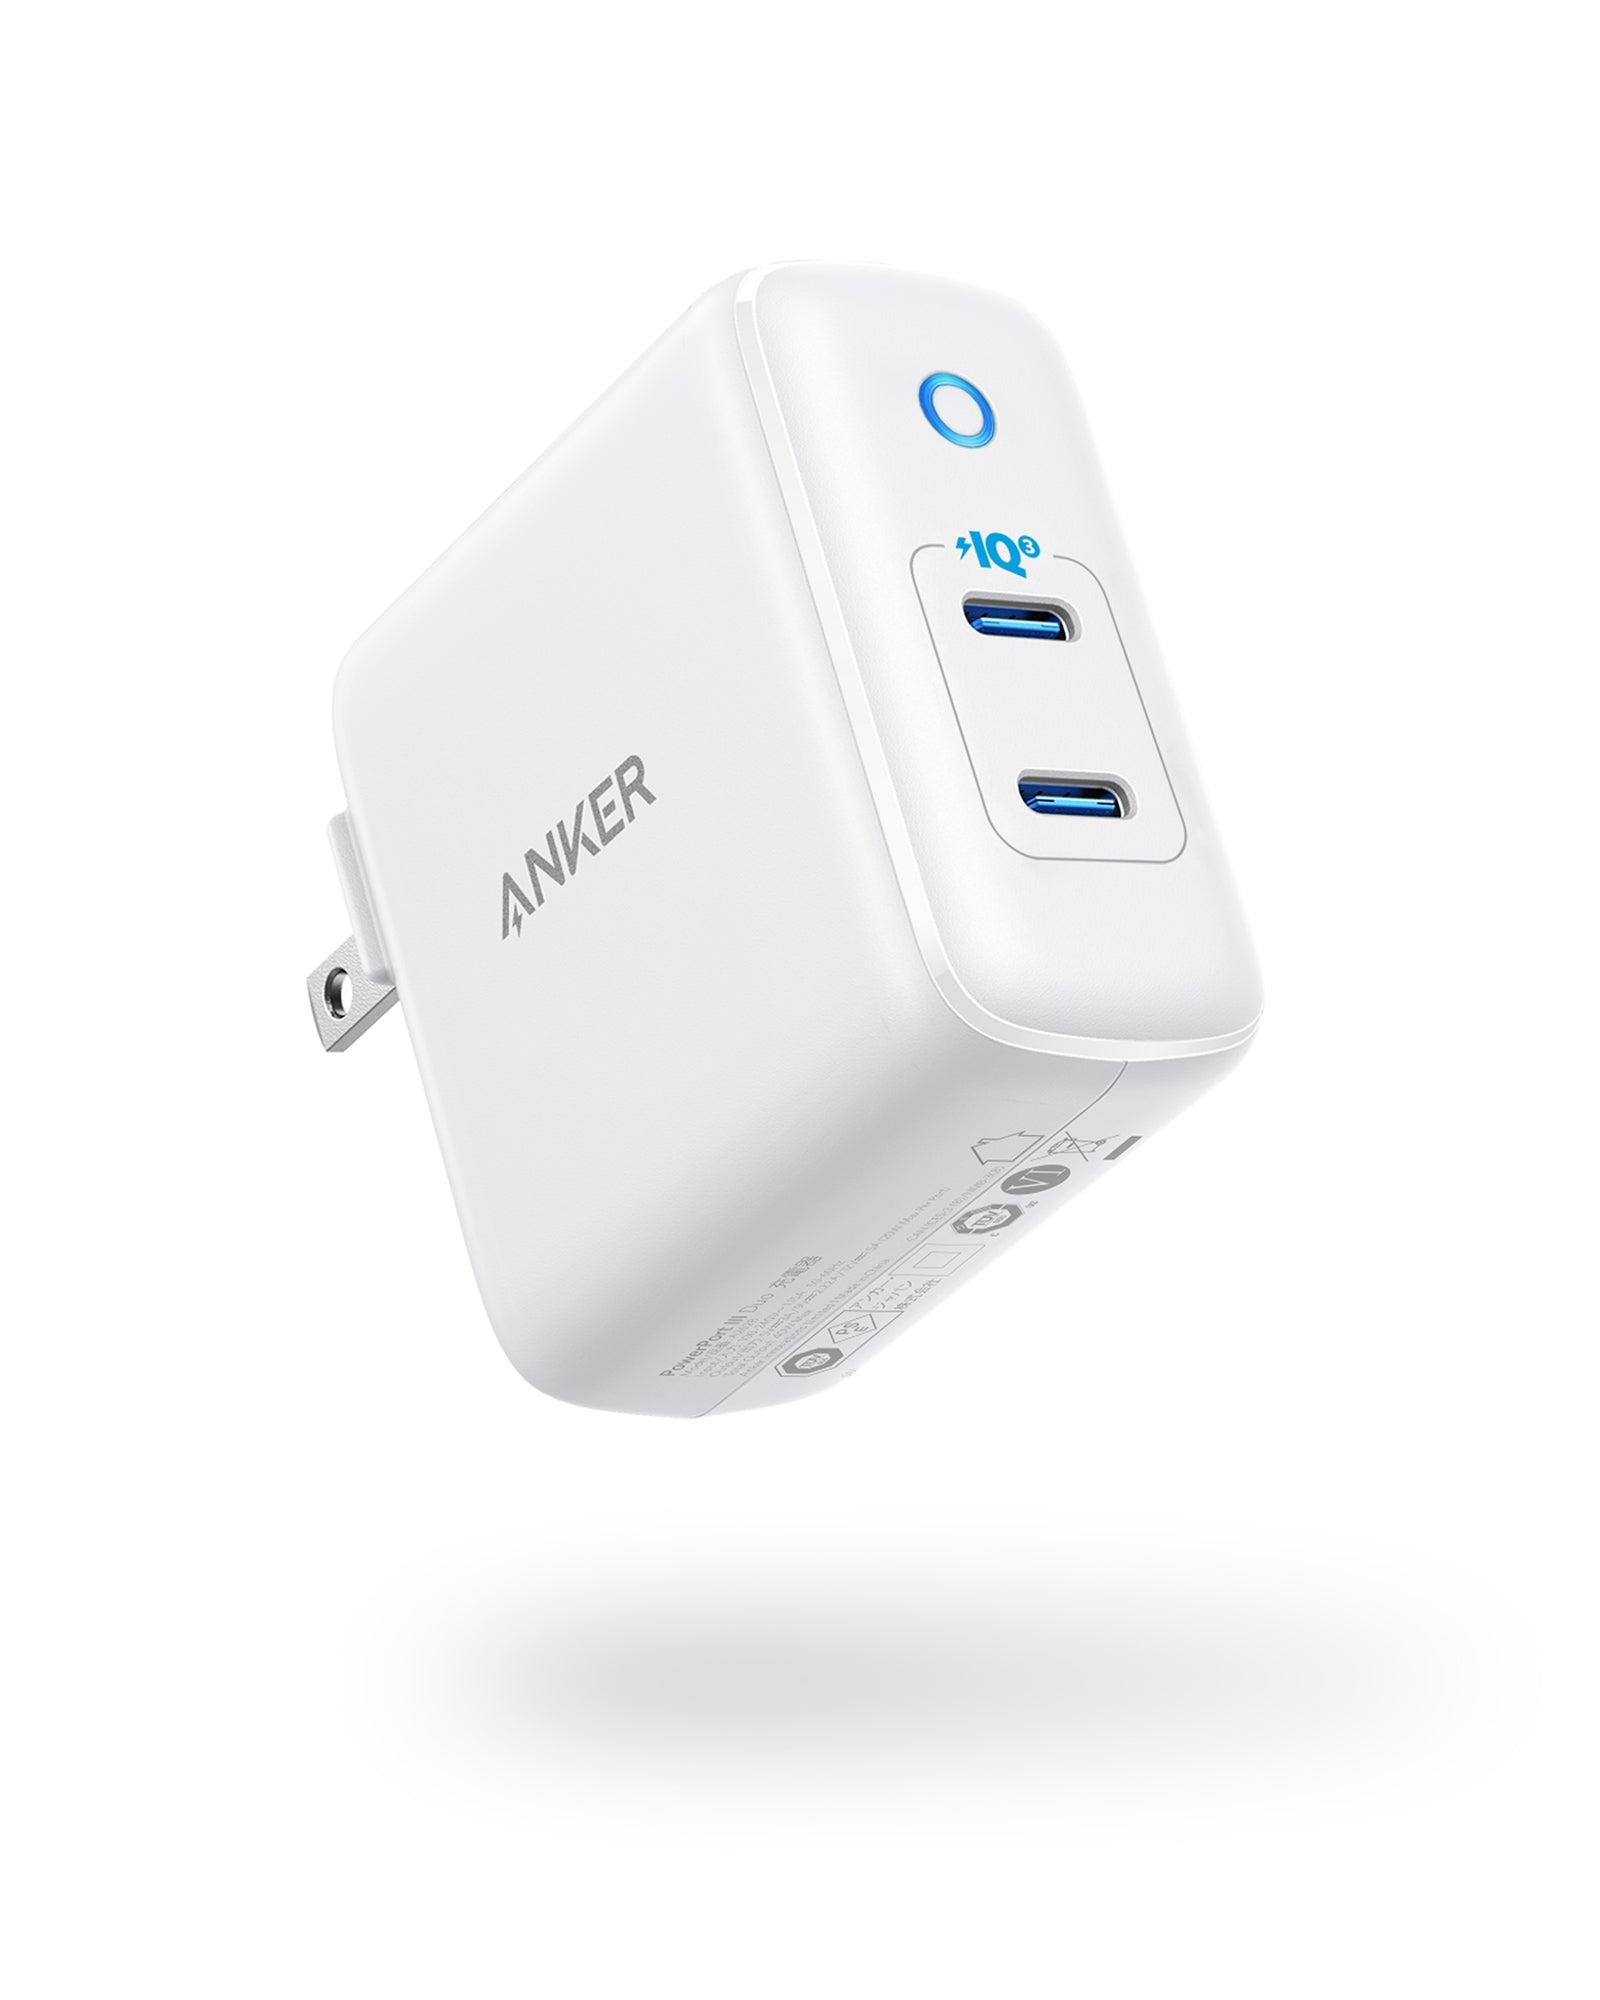 Anker <b>324</b> Charger (40W)